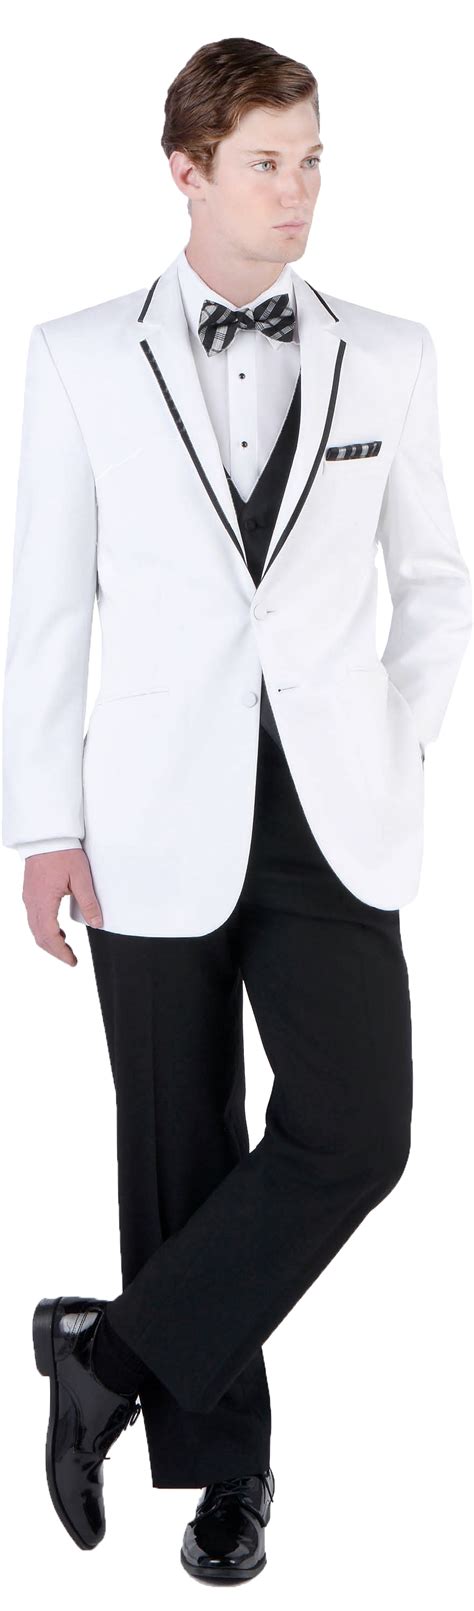 100 Tuxedo Png Images